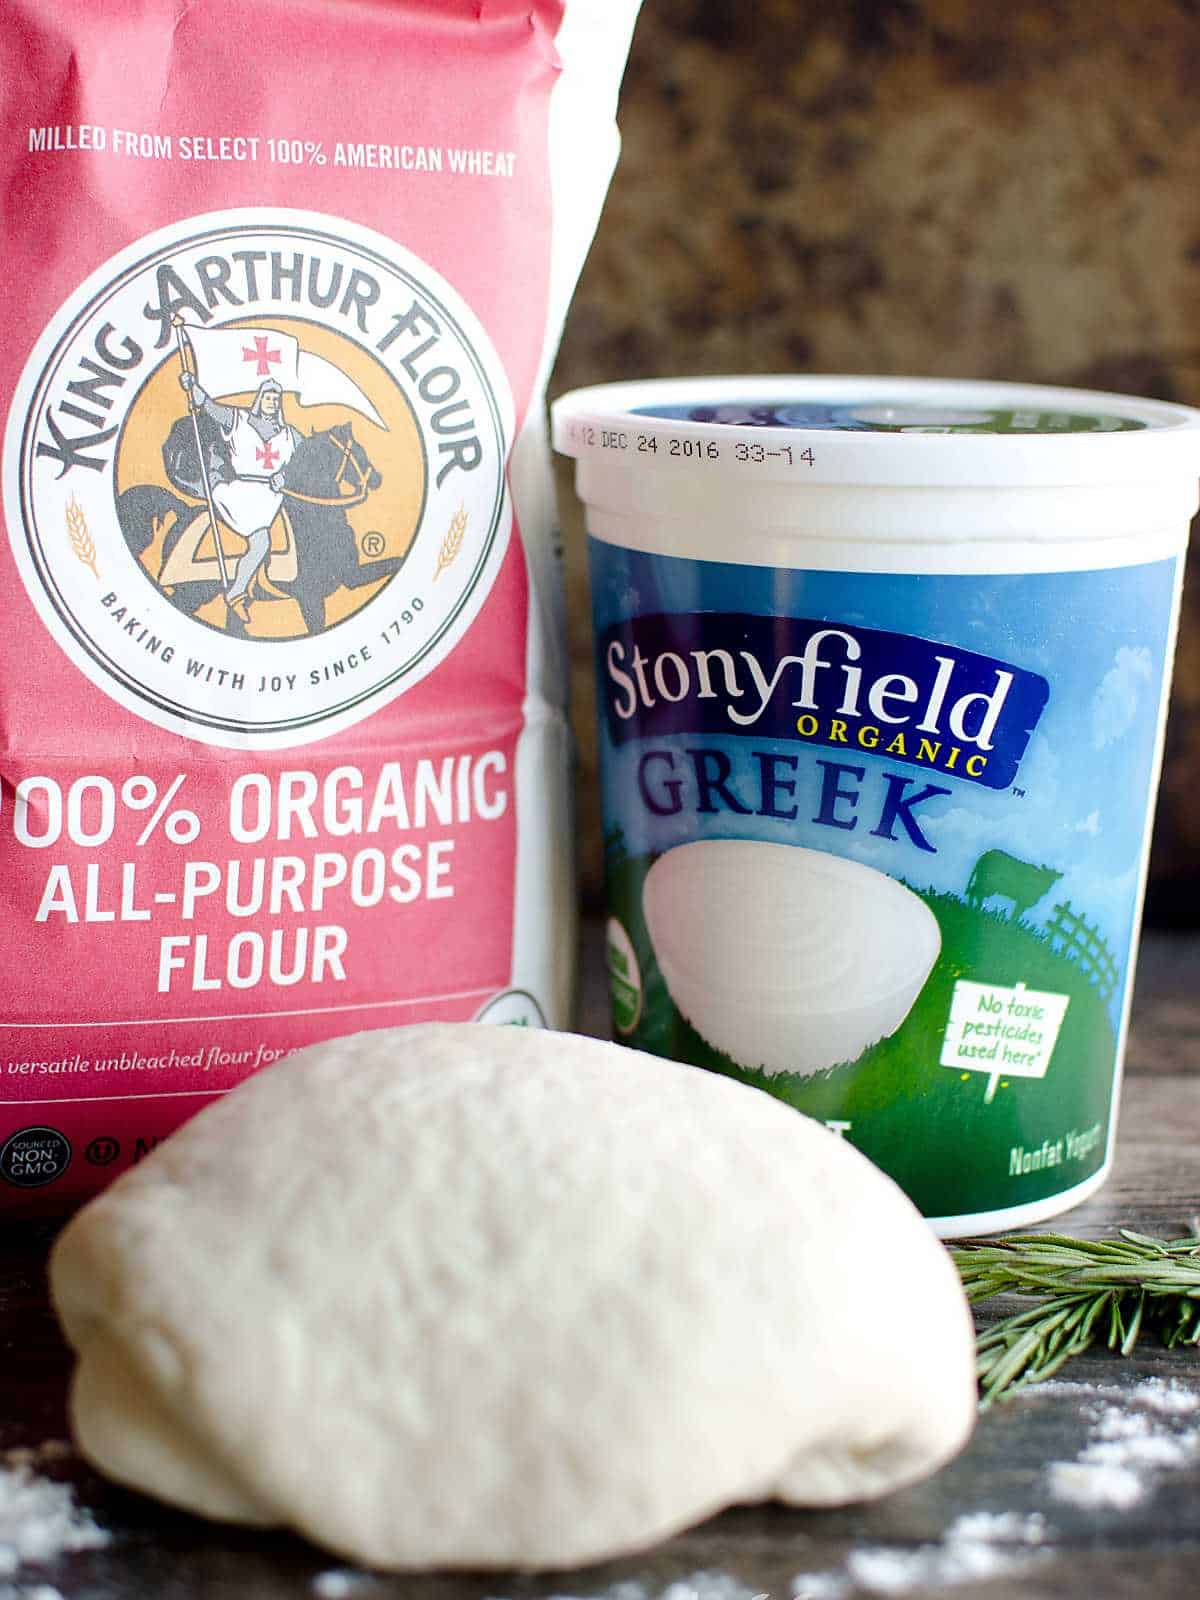 Bag of King Arthur Flour and a quart of Stonyfield Greek yogurt, with a ball of pizza dough.